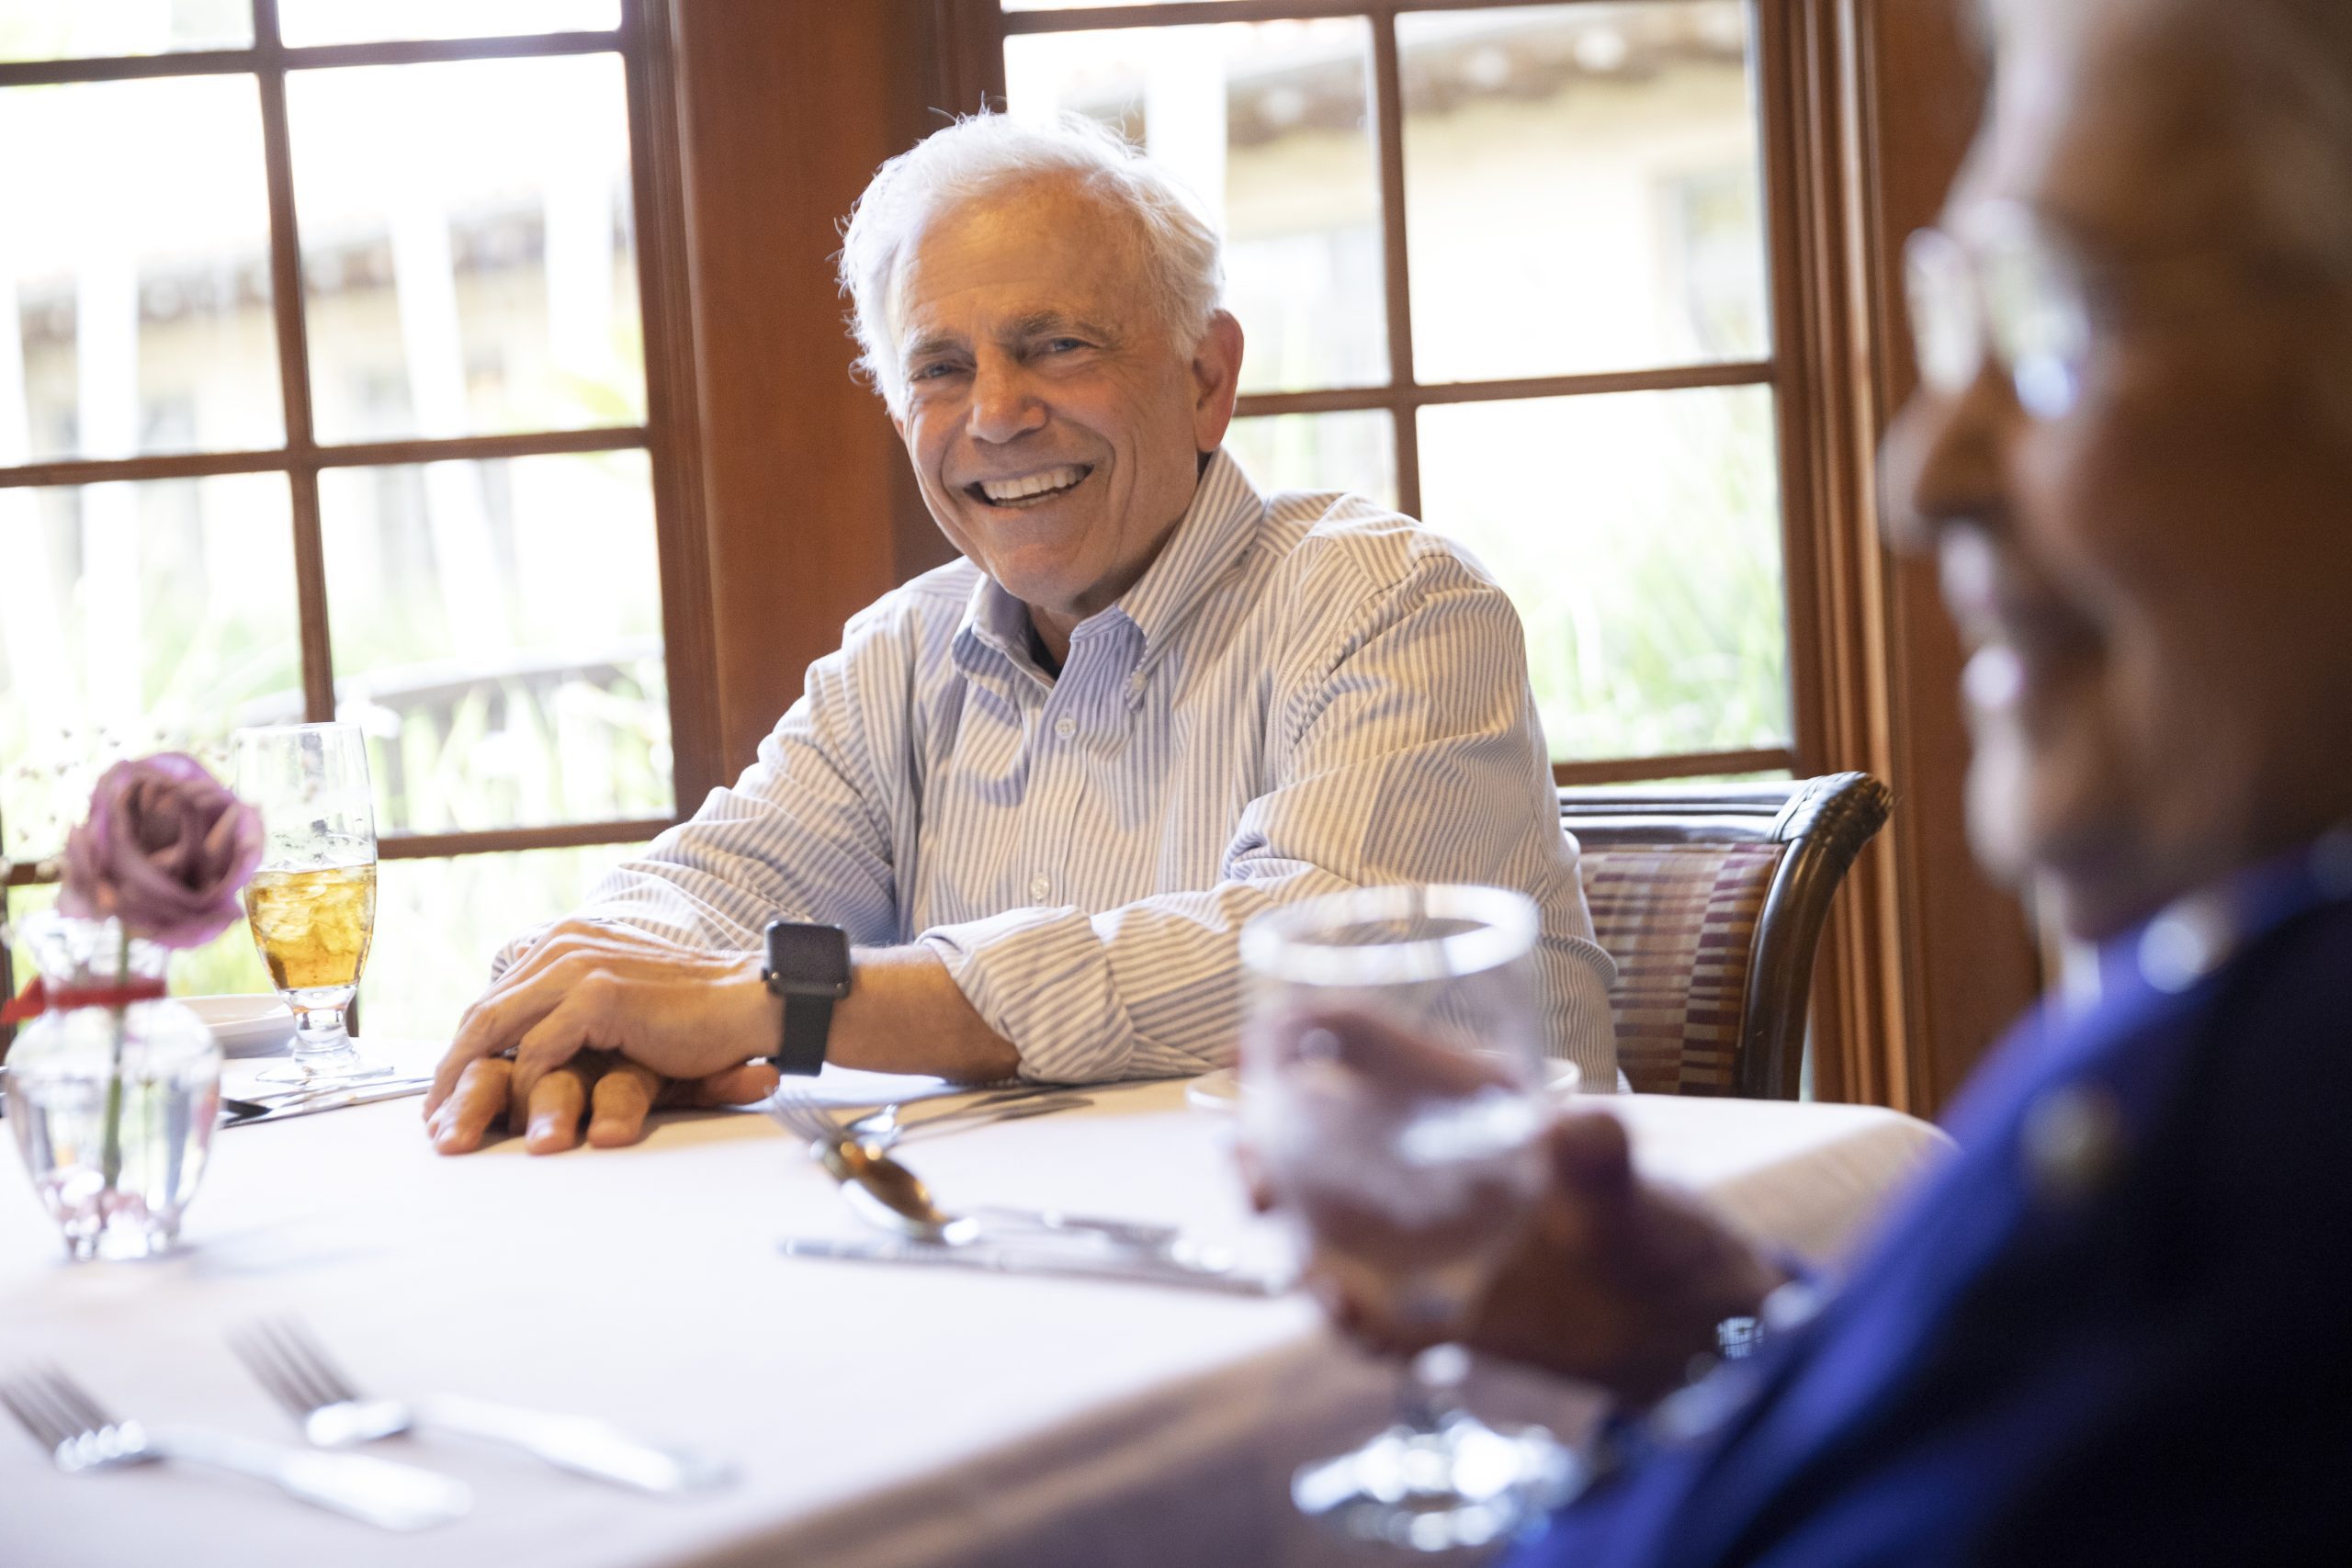 An elderly couple seated at a table, engaged in conversation and enjoying each other's company.